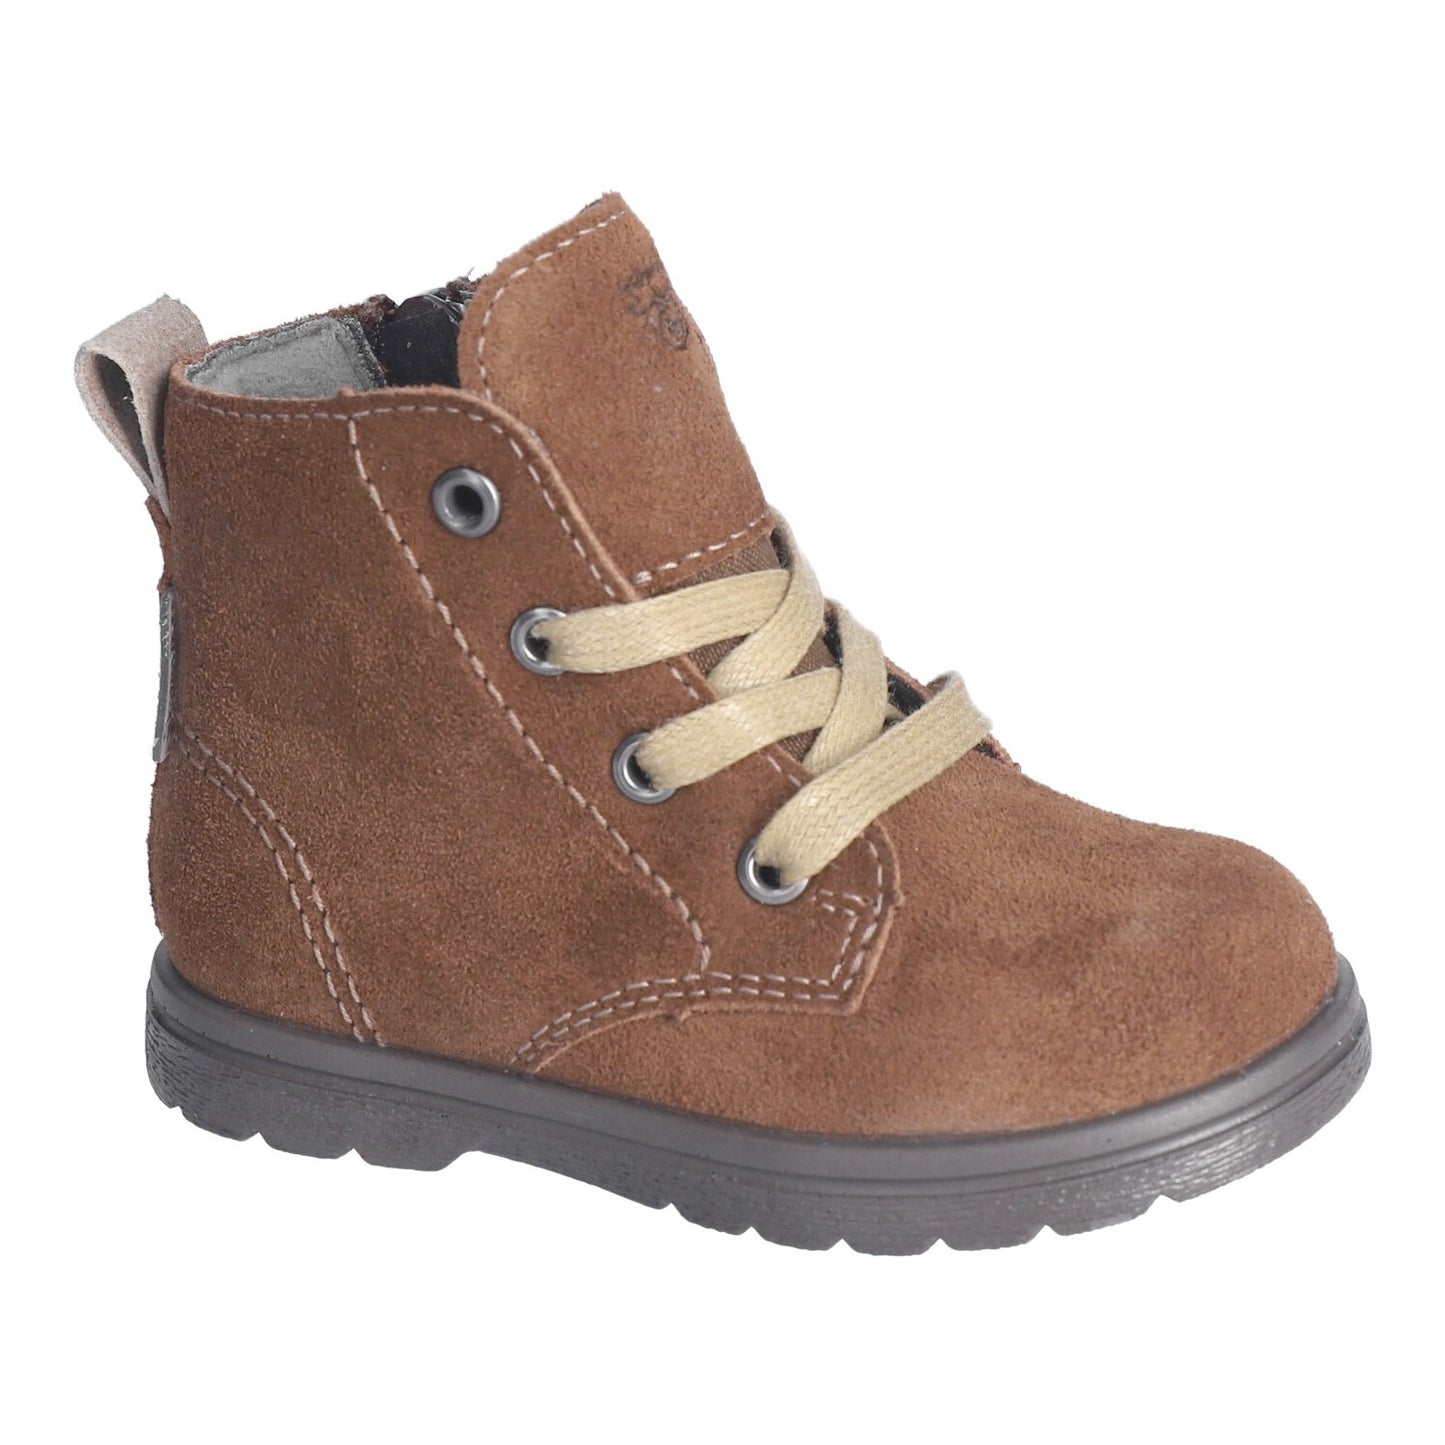 A unisex waterproof ankle boot by Ricosta, style Ilvy, in brown suede with lace and zip fastening. Right side view.